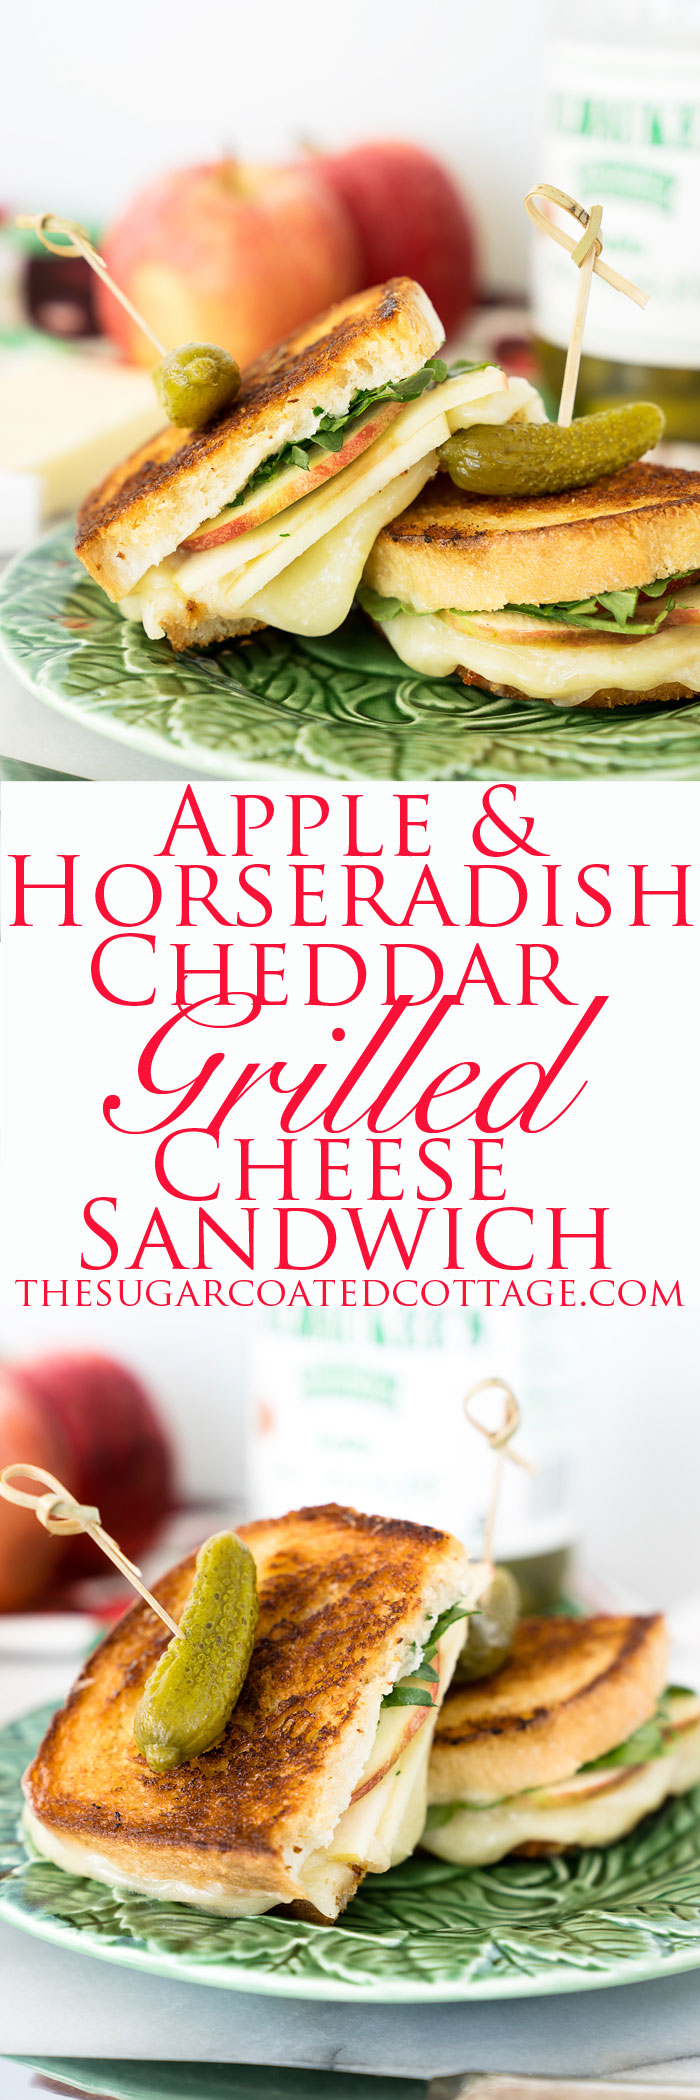 Horseradish Cheddar and Apple Grilled Cheese. Sweet tart apples, melty, bitey horseradish cheddar cheese, arugula and crispy golden brown bread. | thesugarcoatedcottage.com